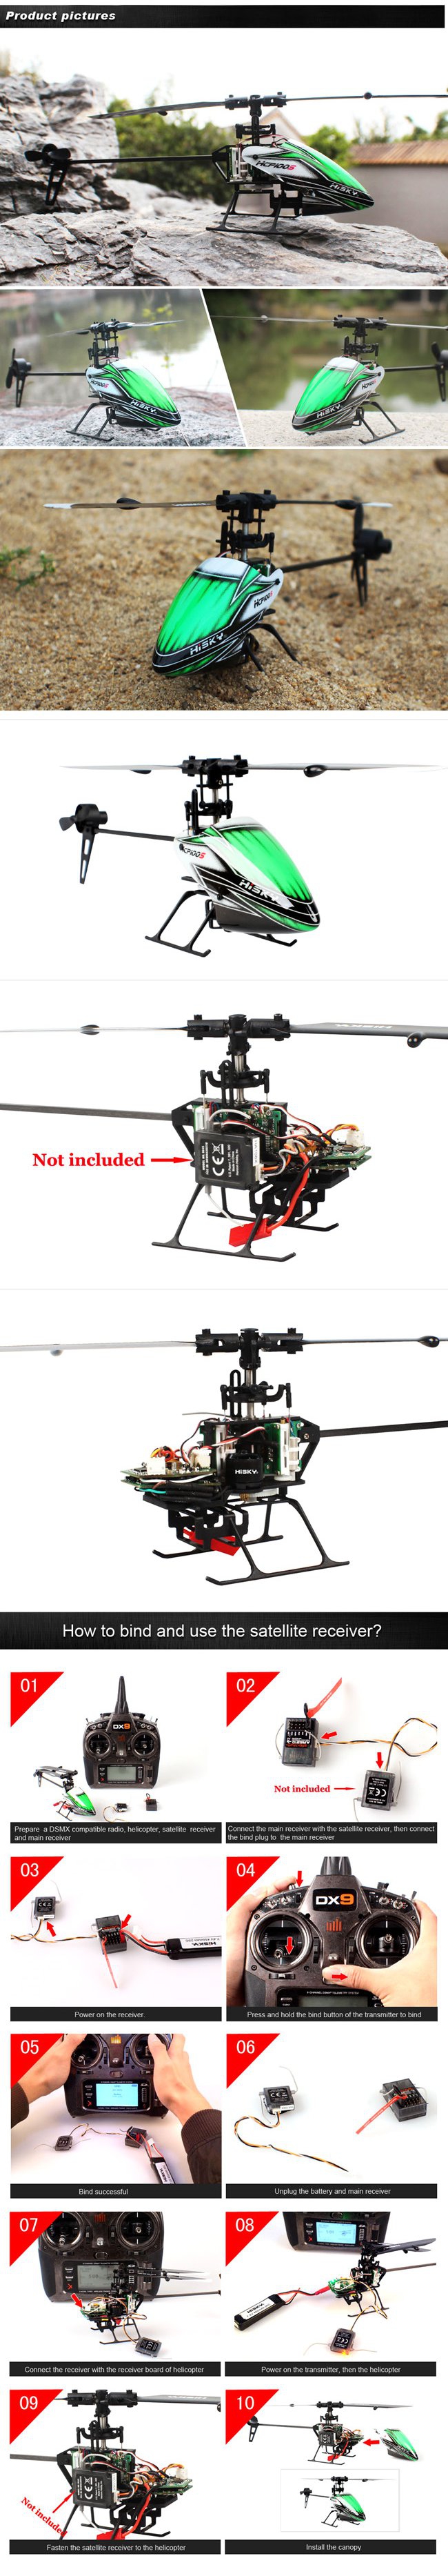 Hisky HCP100S 6CH 3 Axis Gyro Dual Brushless RC Heli+HT8 Adapter  